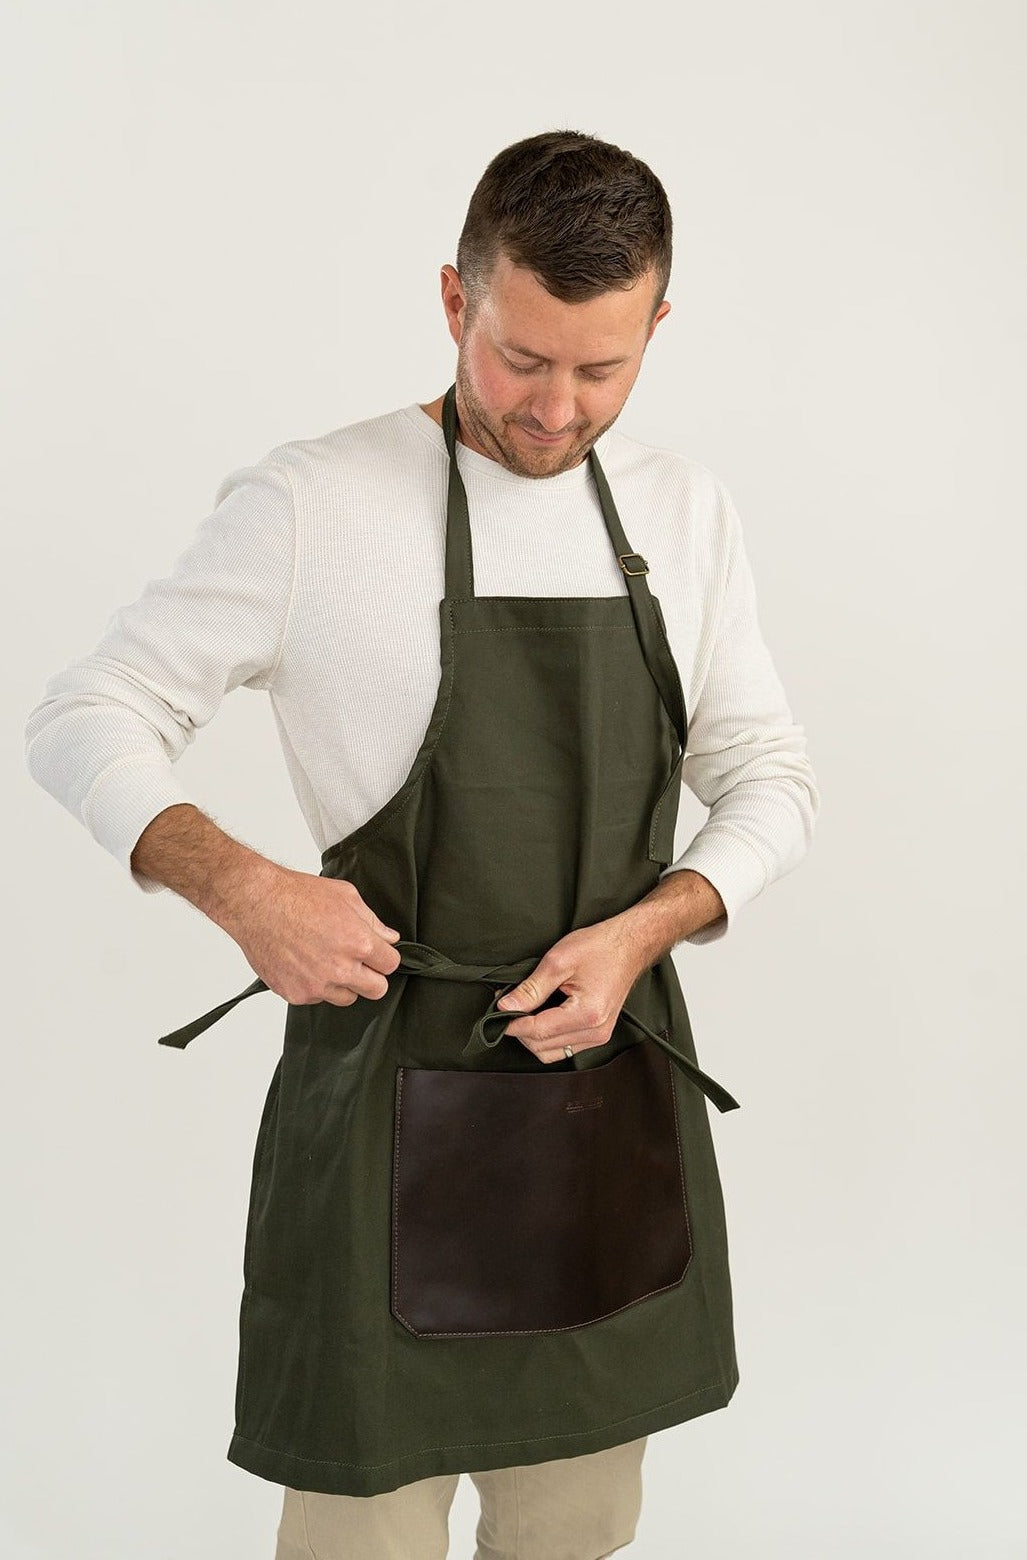 Riveter Made Apron | Fatigue + Brown Leather